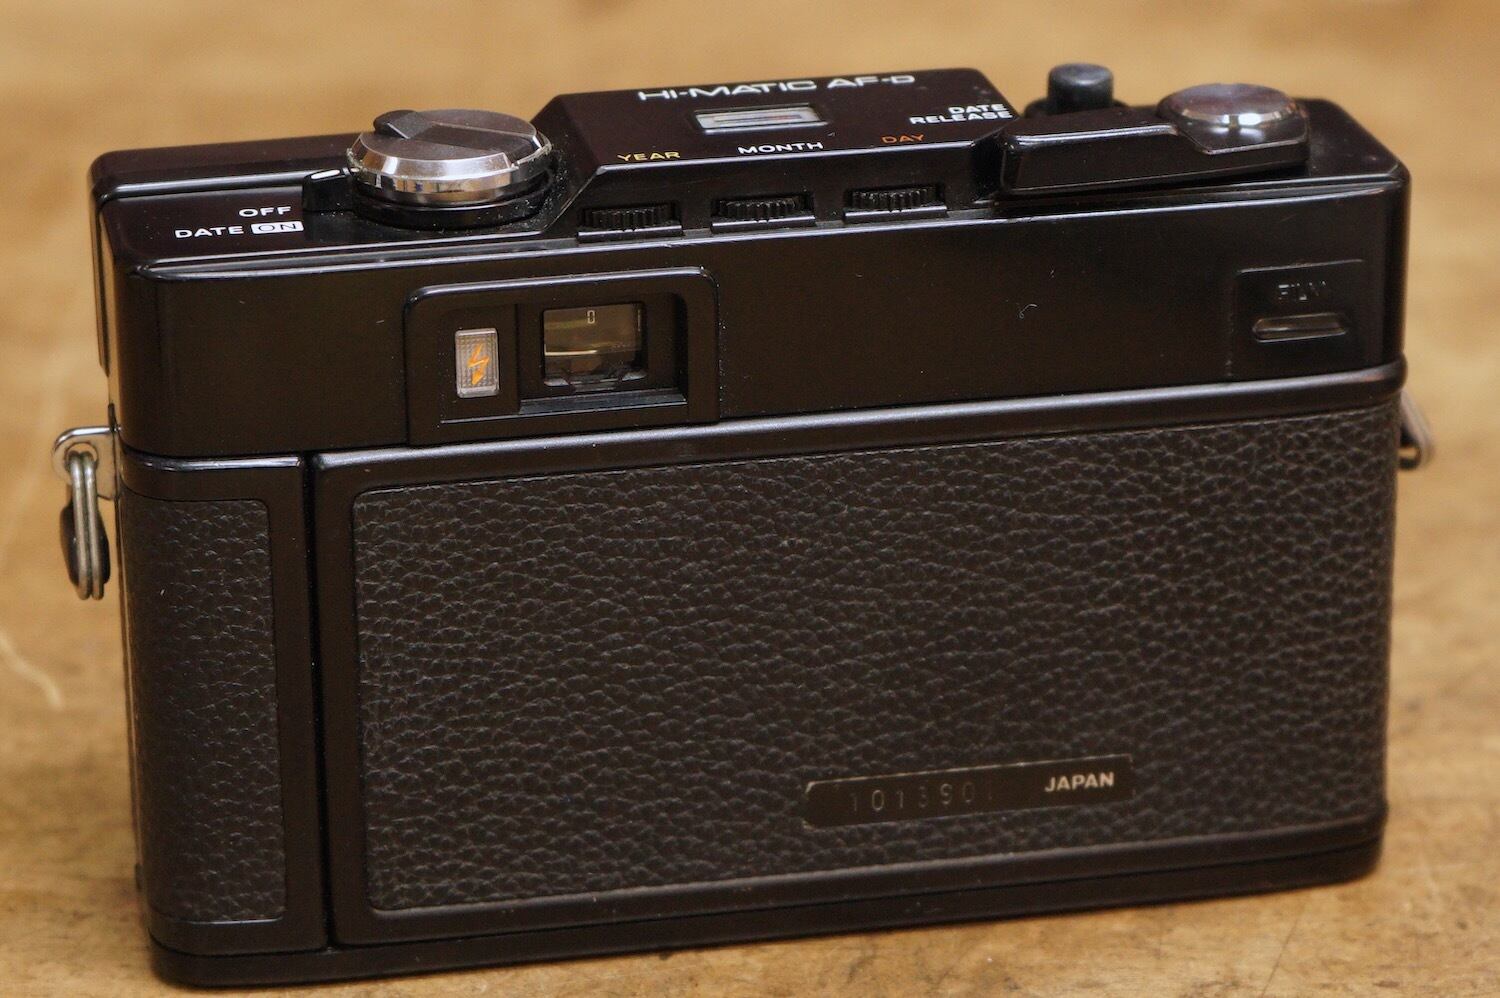 2490FC1 MINOLTA HI-MATIC AF-D コンパクトフィルムカメラ 中古 電池付き | ANTIQUE JOHN アンティーク  ジョン powered by BASE